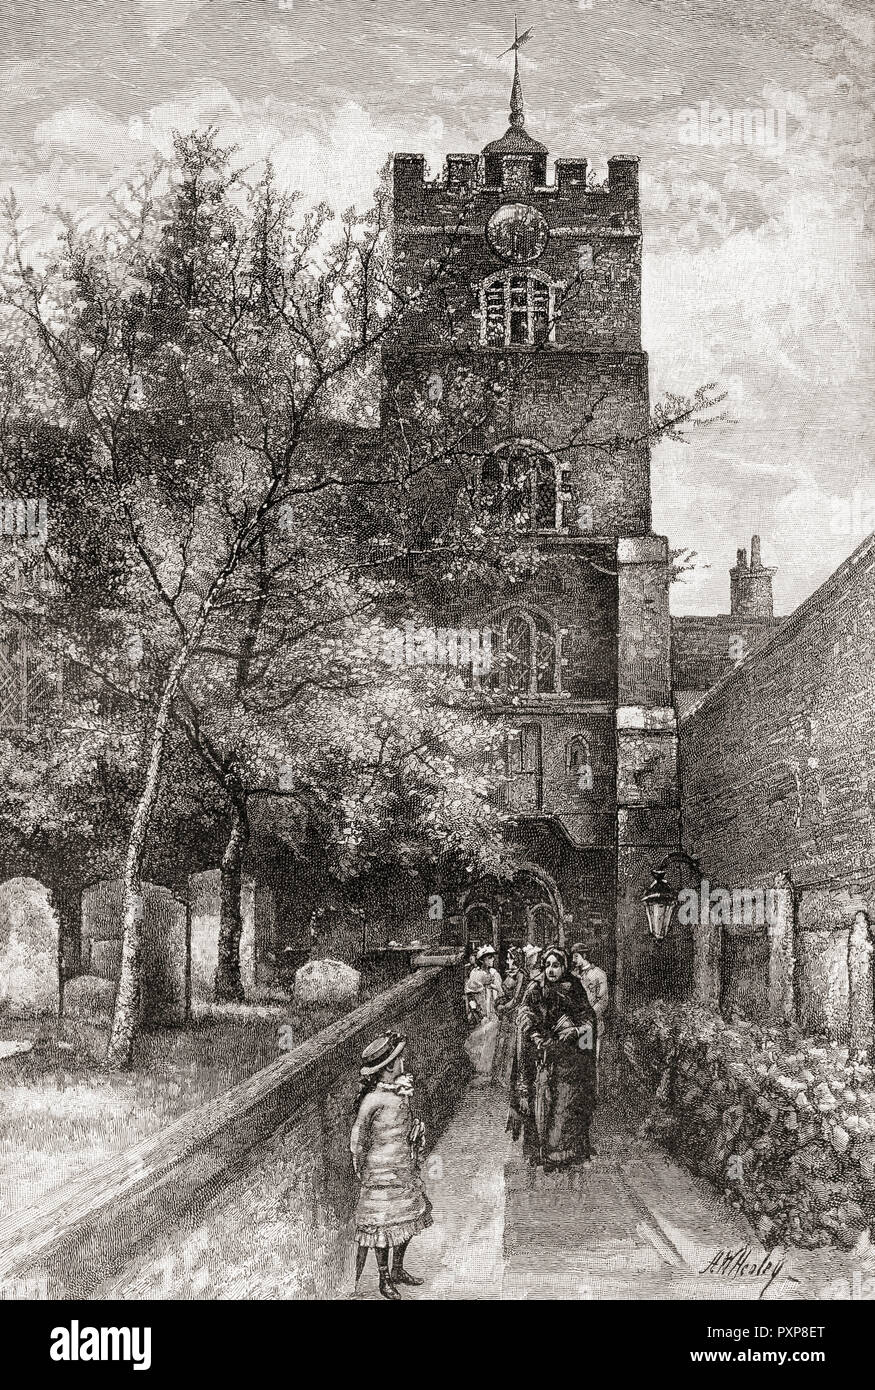 The Priory Church of St Bartholomew the Great, aka Great St Bart's, West Smithfield, London, England, seen here in the 19th century.  From London Pictures, published 1890. Stock Photo